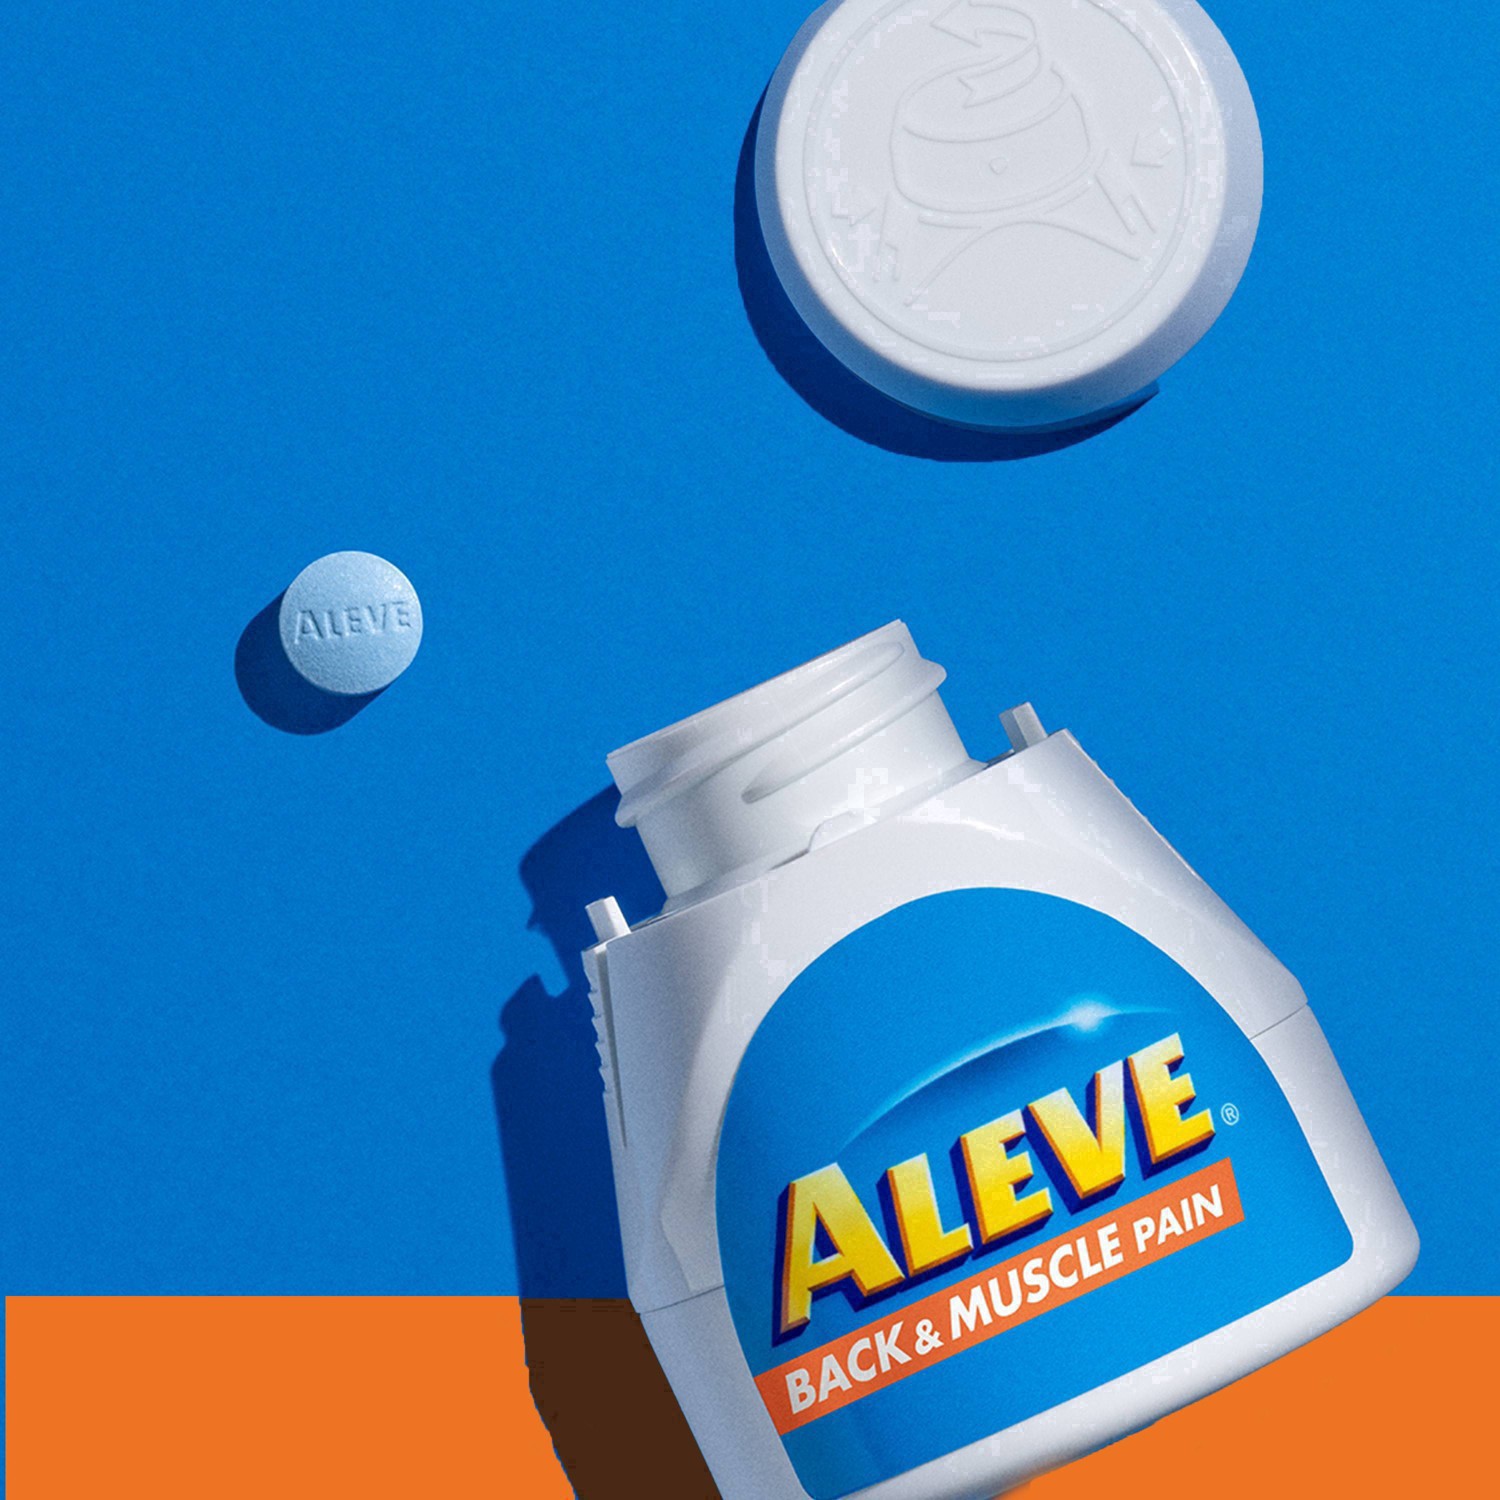 slide 44 of 73, Aleve Back & Muscle Pain Relief Naproxen Sodium Tablets, 50 ct